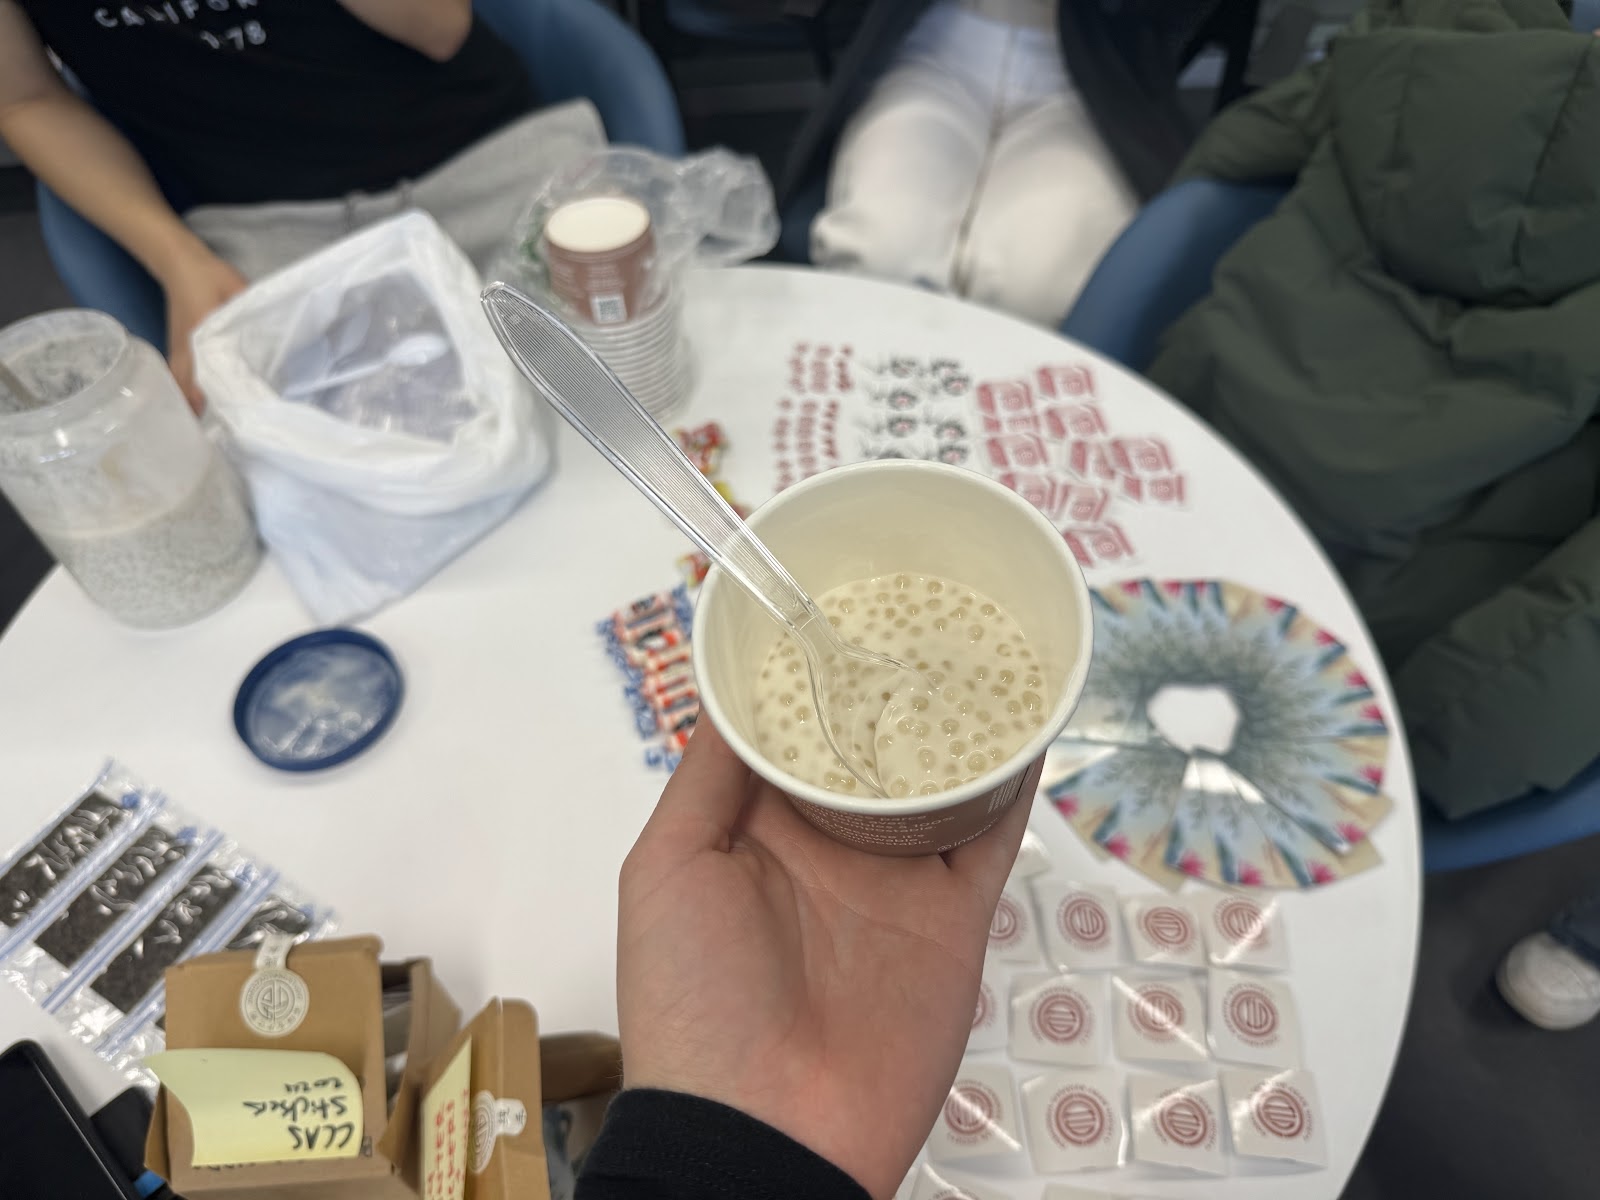 A white person’s hand holds a compostable cup filled with a white soup, which contains clear sago pearls. Some stickers are visible on the table in the background.